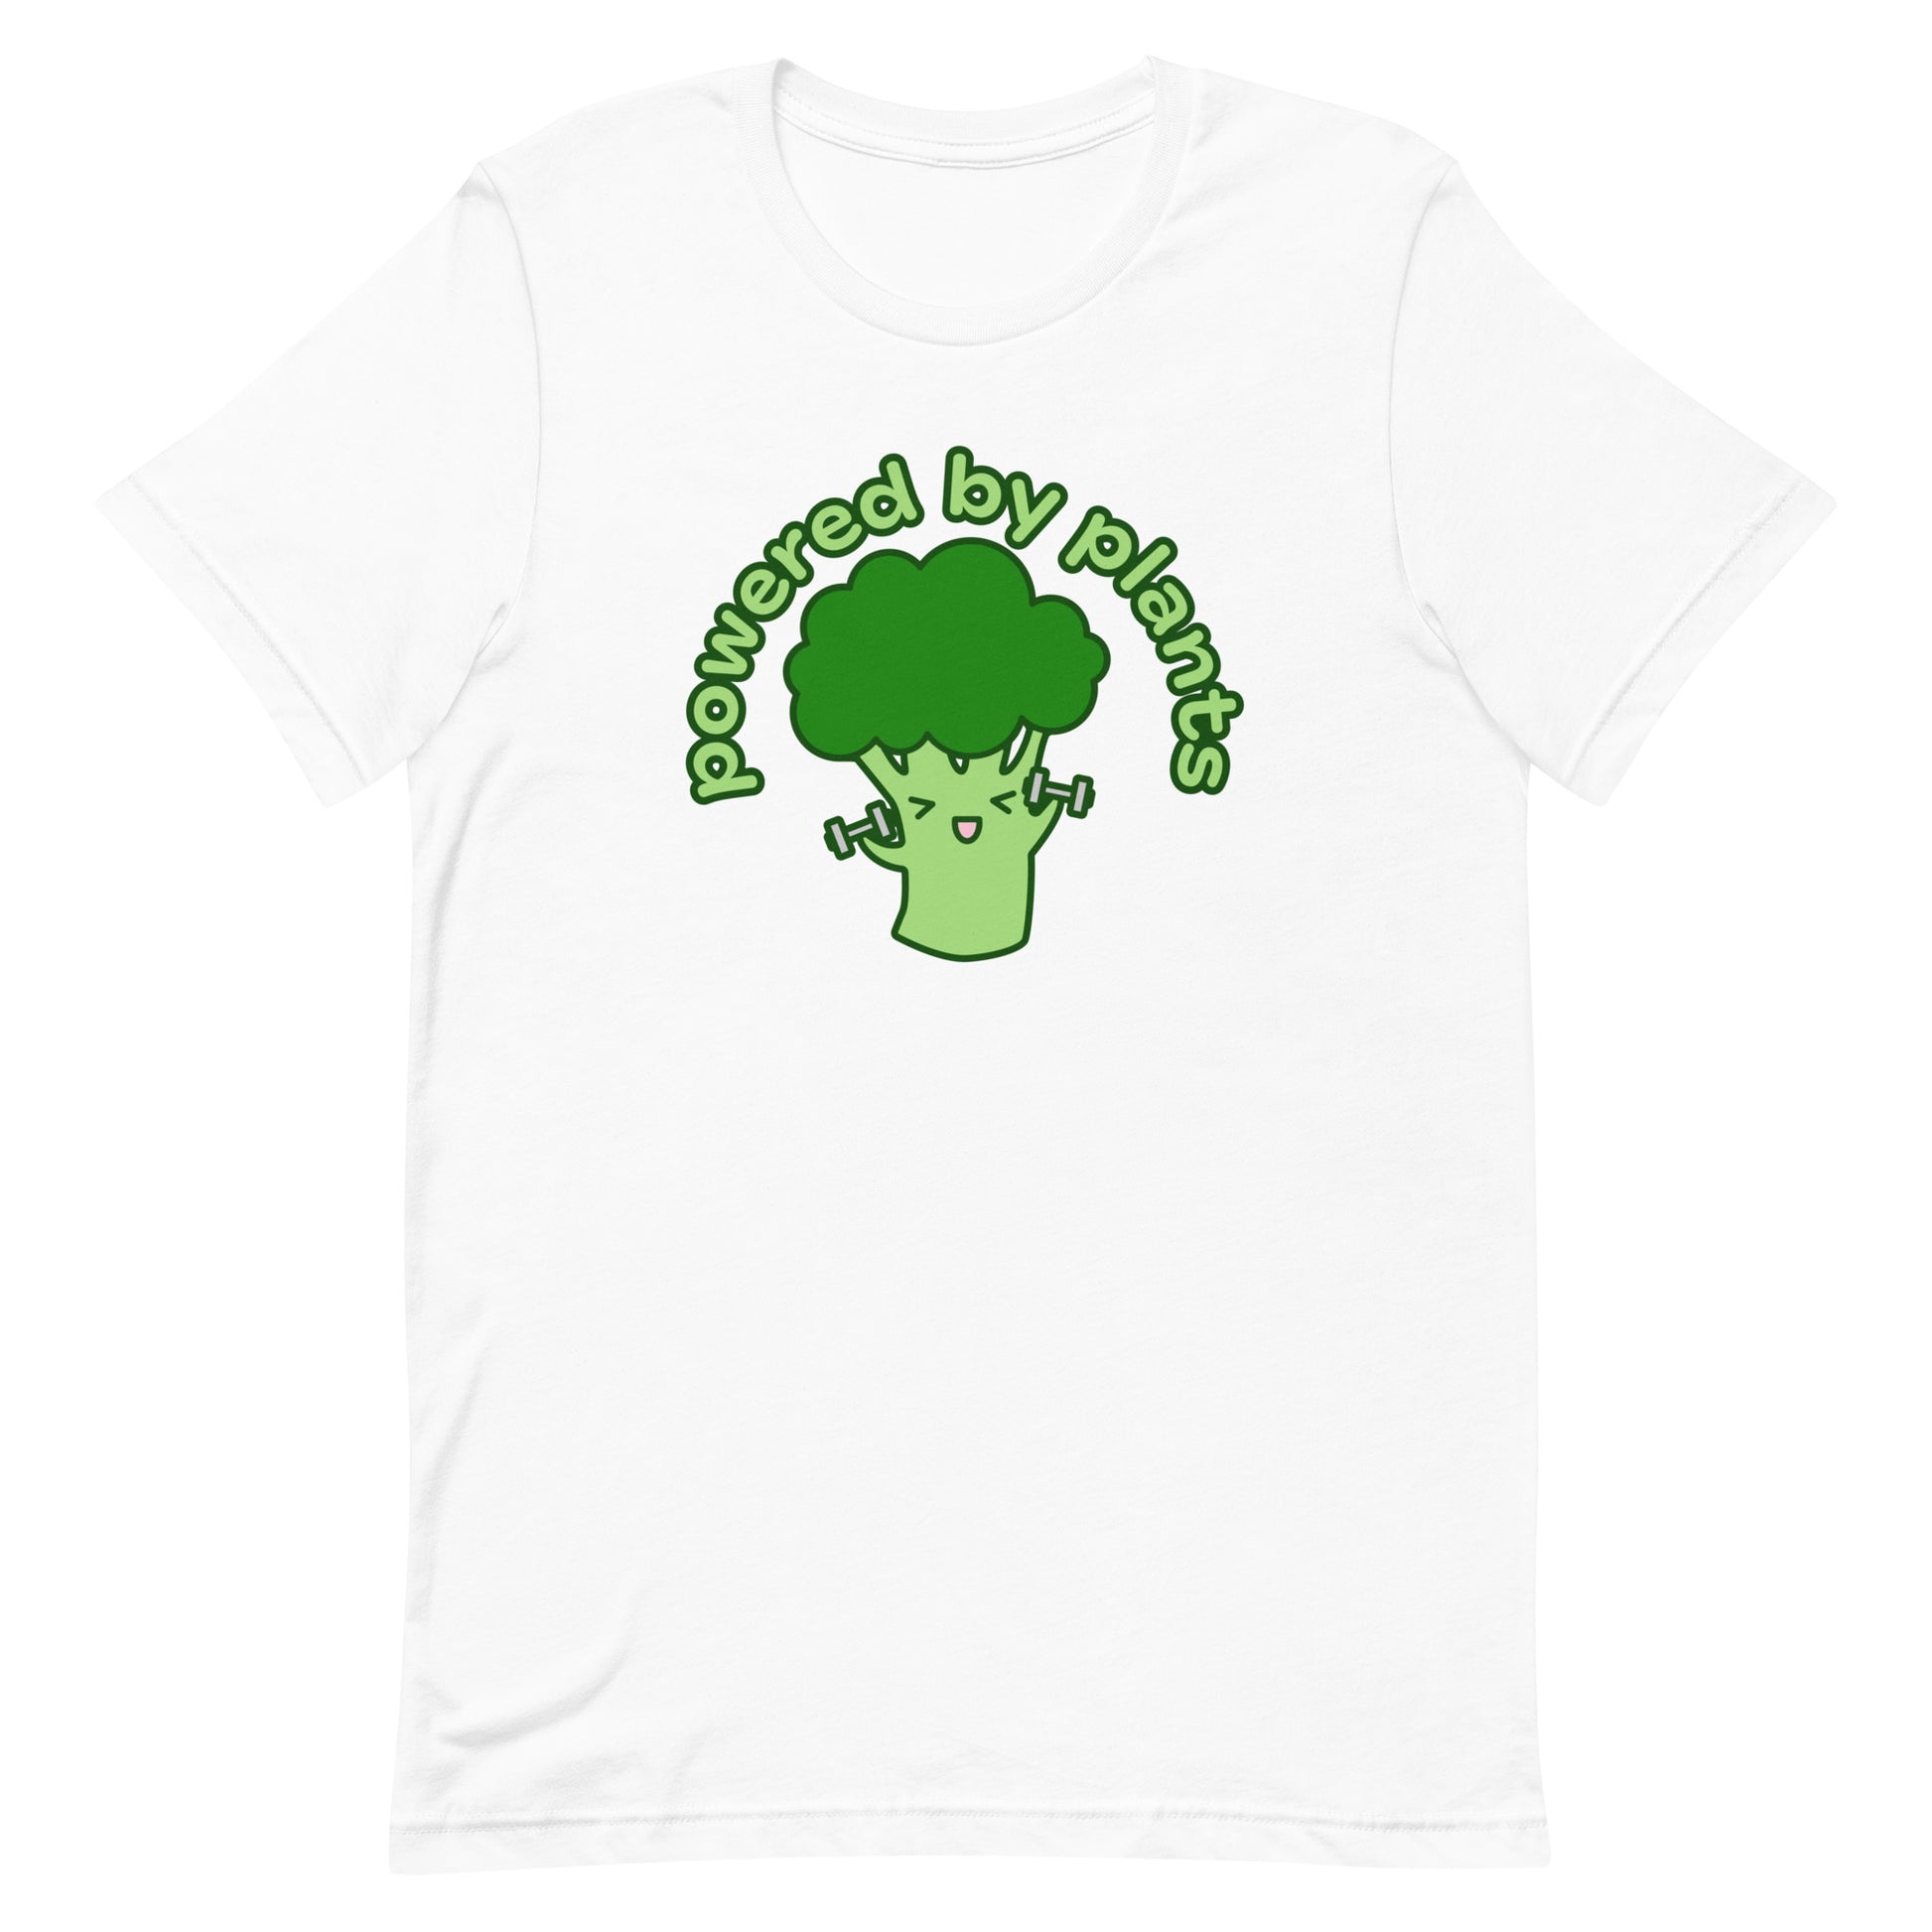 A white crewneck t-shirt featuring an illustration of a cartoon broccoli character. The broccoli is excitedly lifting weights, and text in an arc above the broccoli reads "powered by plants".